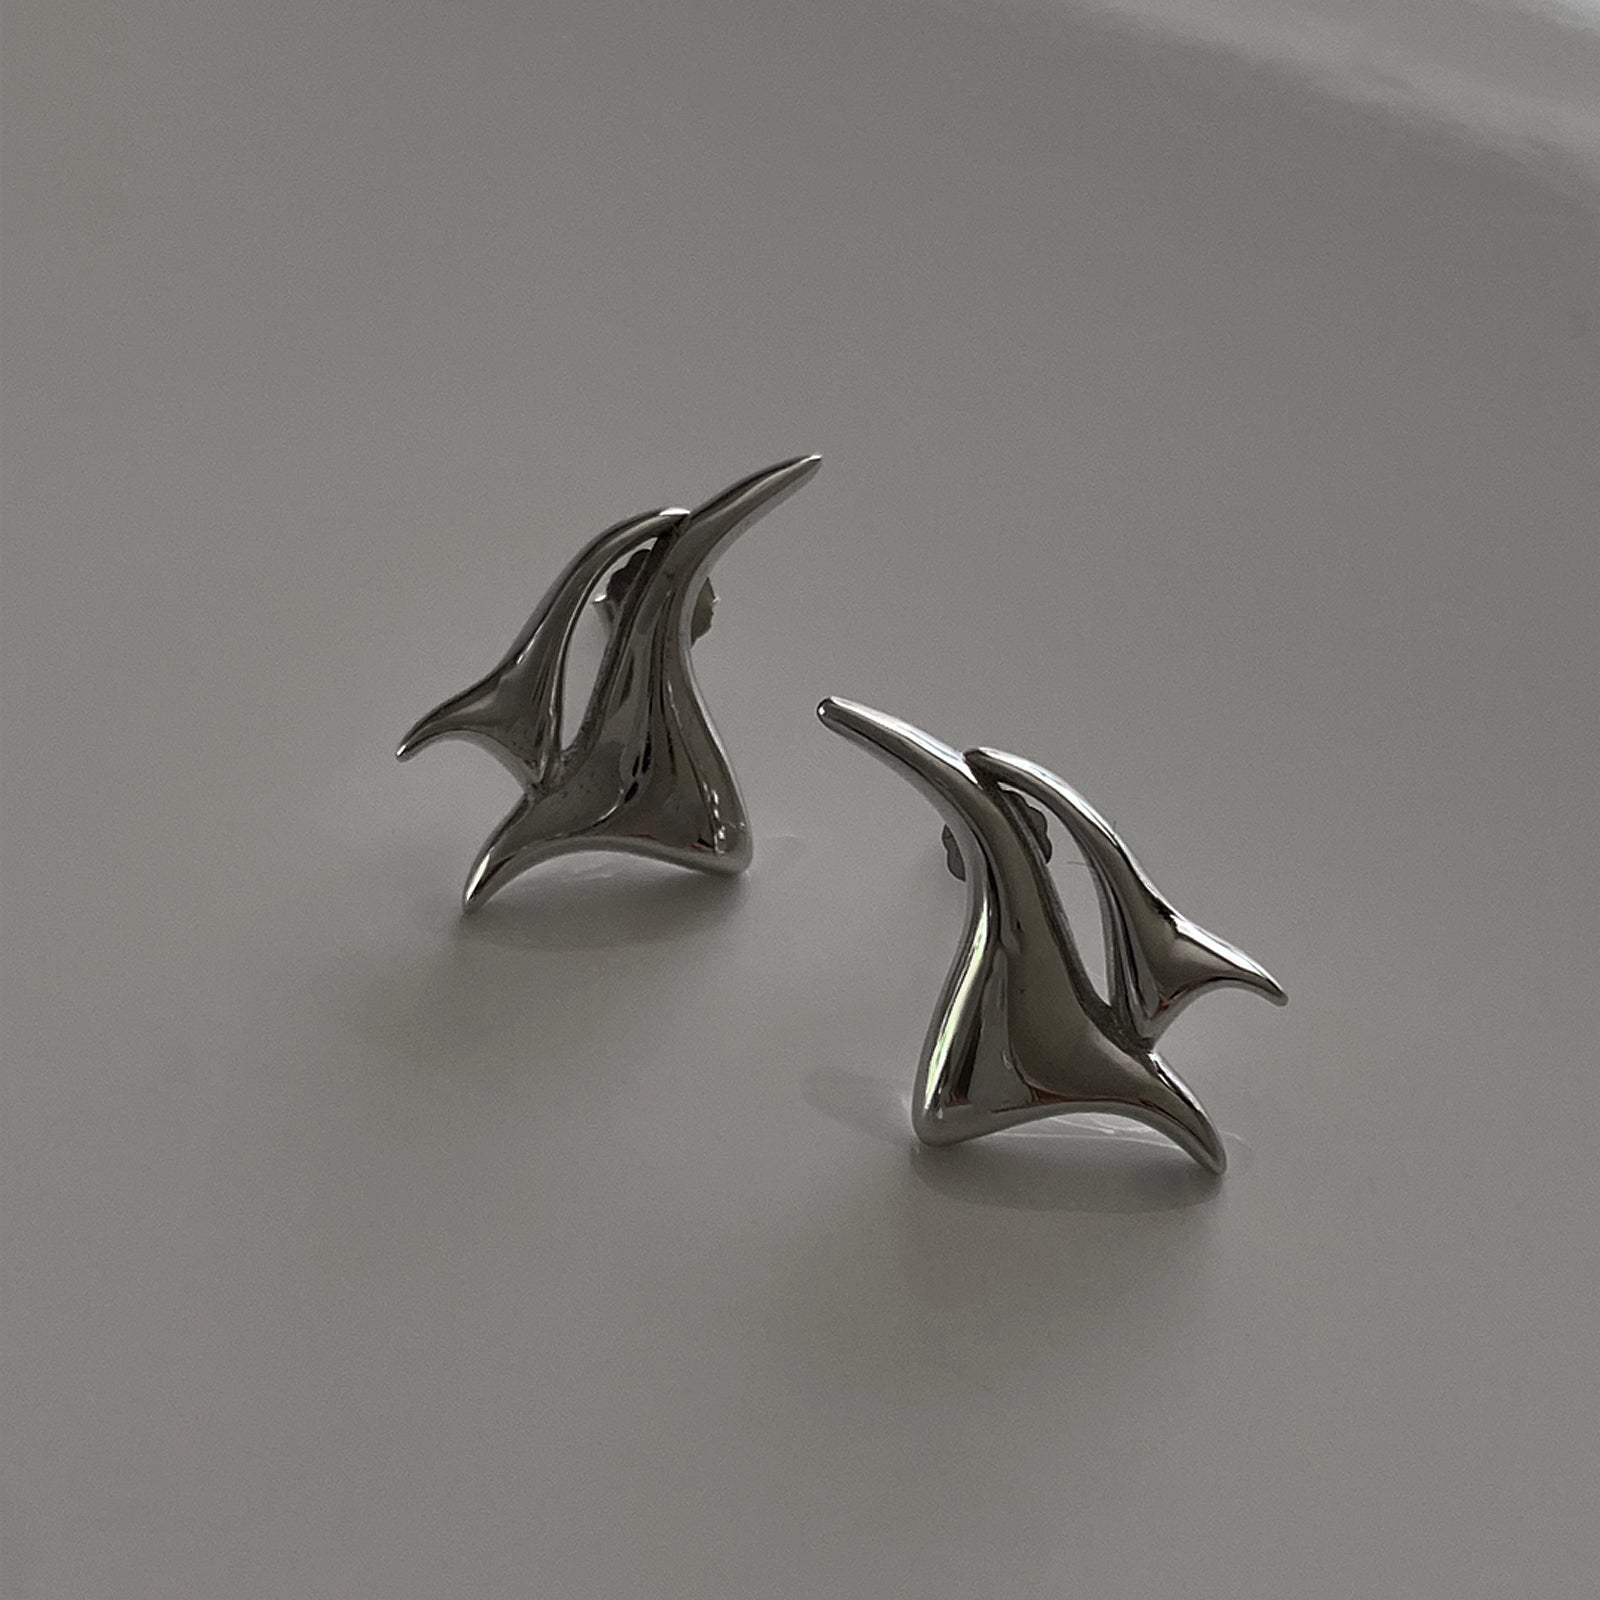 A close up look of our silver studs called Flame Studs.